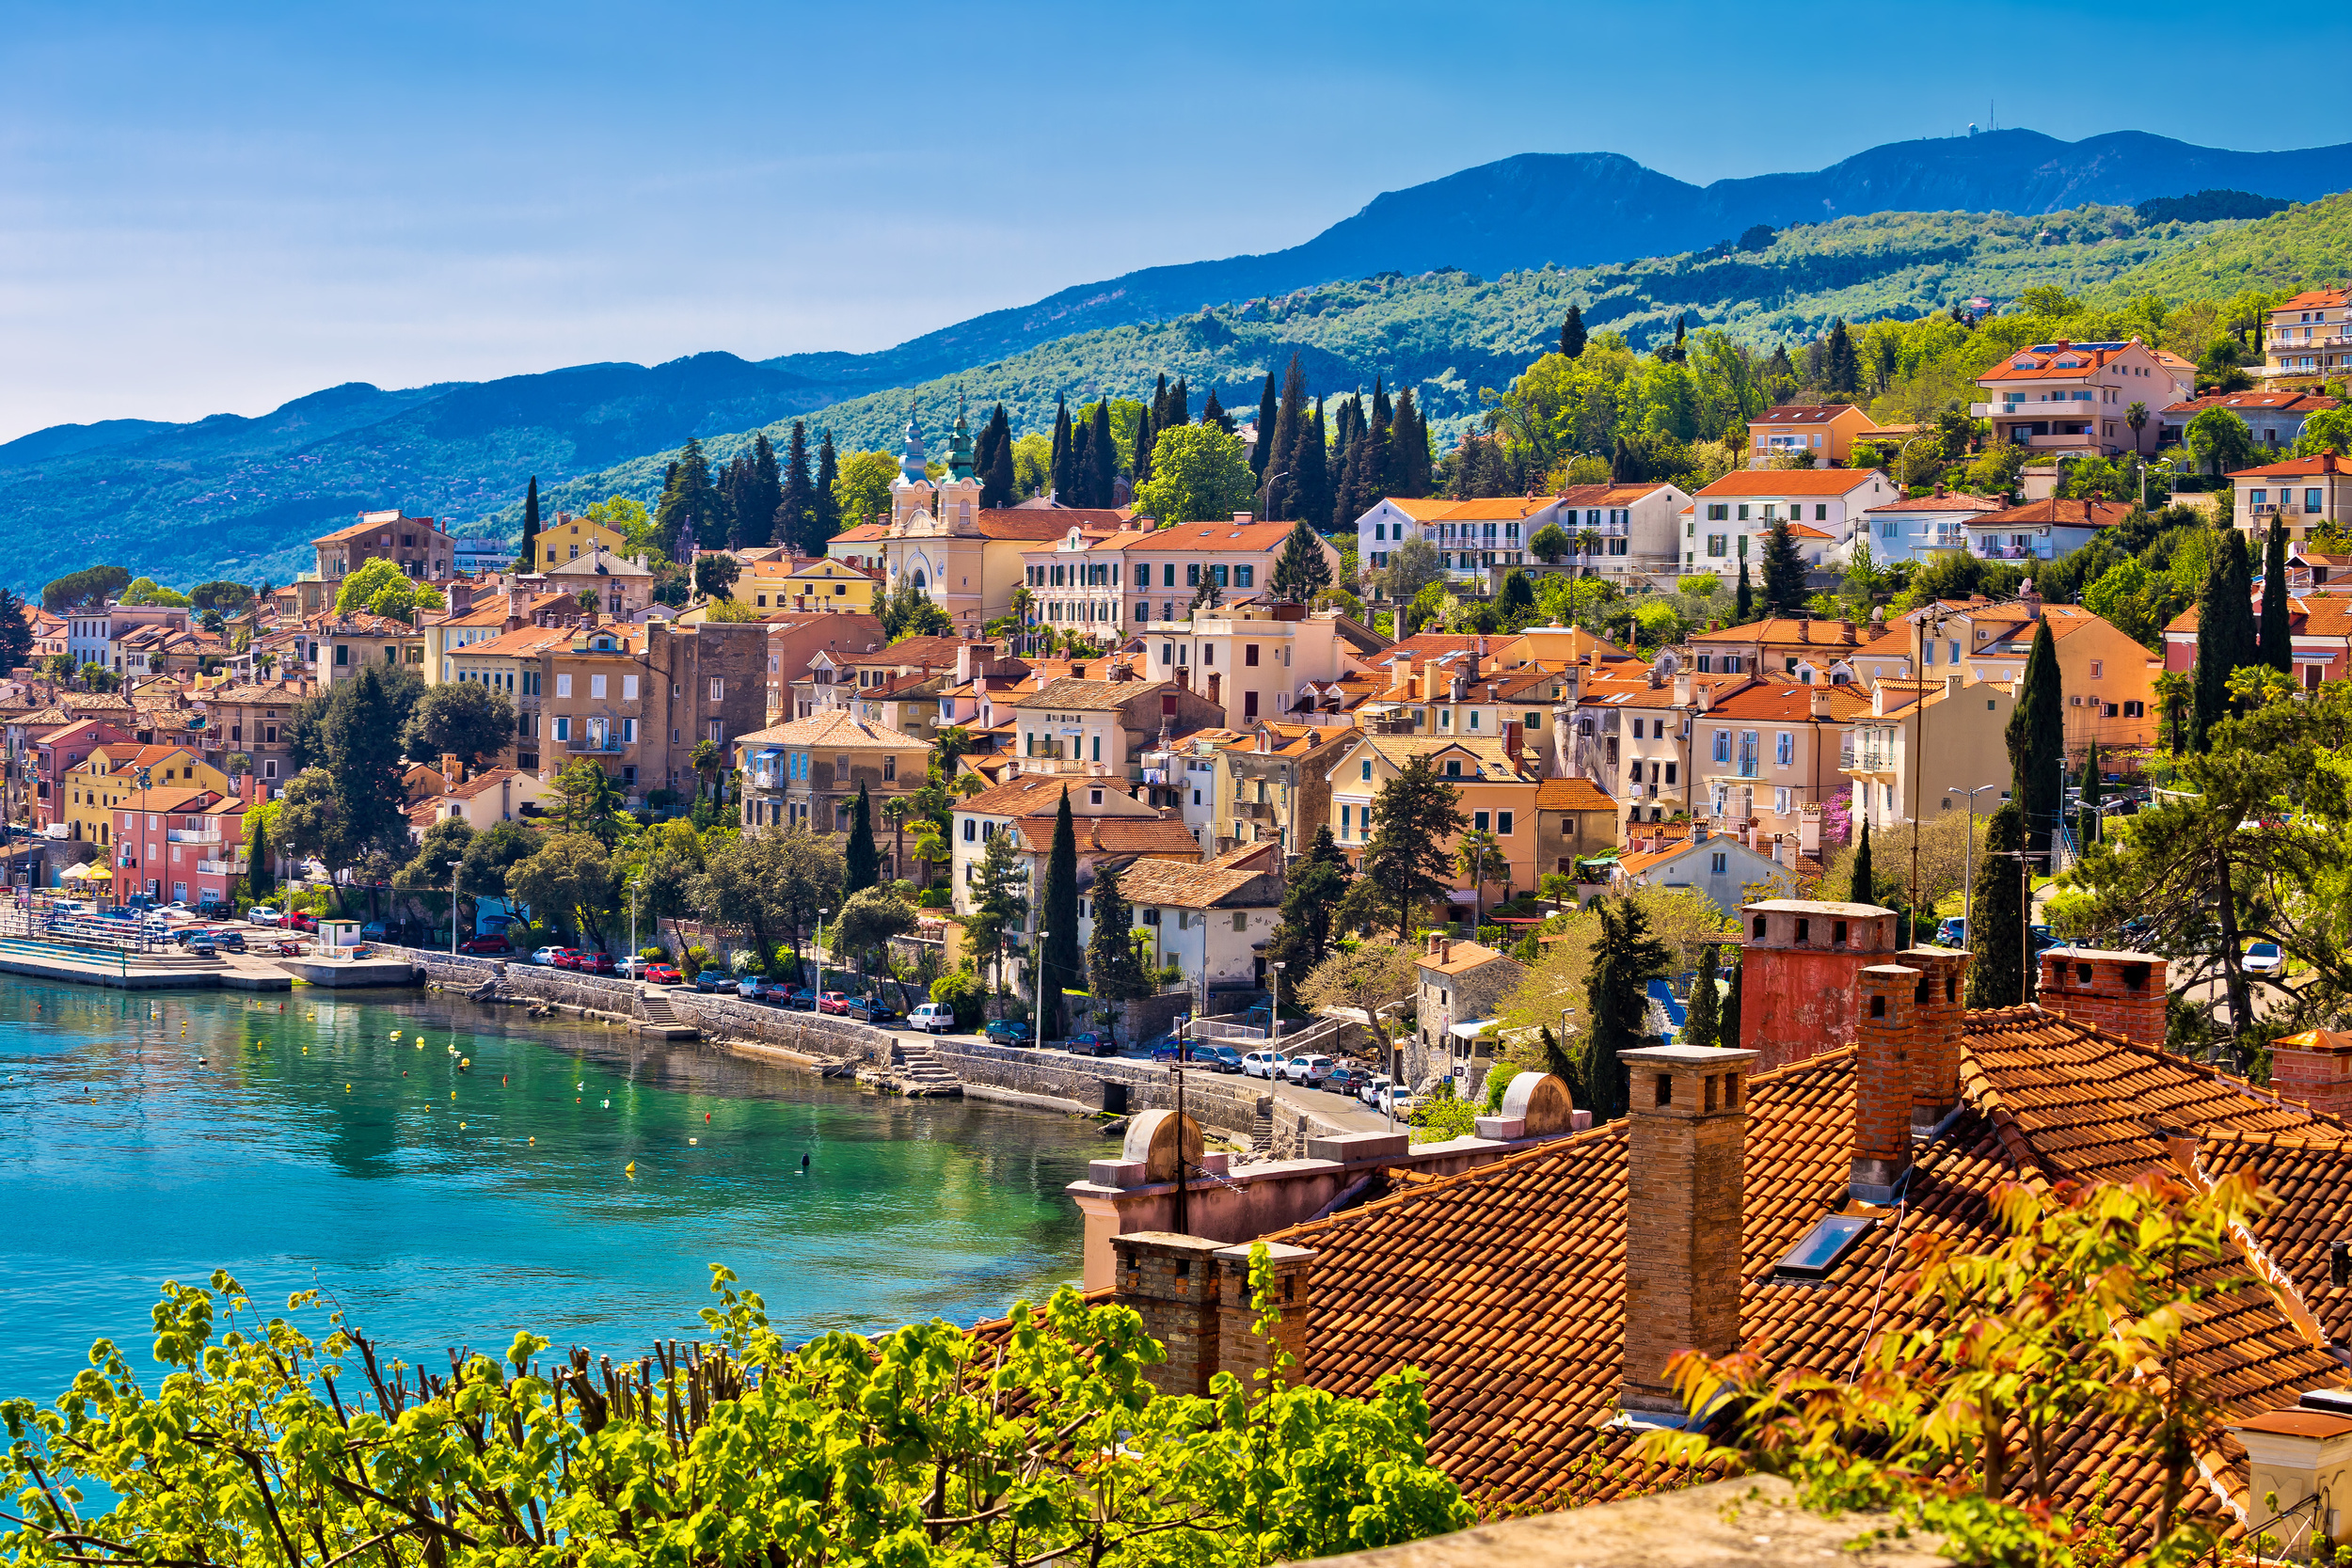 <p>Most popular among Austrian retirees, Opatija is absolutely worth a stop for wonderful food and views. It’s also home to a number of mansions from the Habsburg period — an interesting contrast to much of the coast. And, if you visit outside of peak season, you’ll likely have it all to yourself. </p><p>You may also like: <a href='https://www.yardbarker.com/lifestyle/articles/sweet_world_25_dessert_recipes_from_around_the_globe/s1__38839778'>Sweet world: 25 dessert recipes from around the globe</a></p>